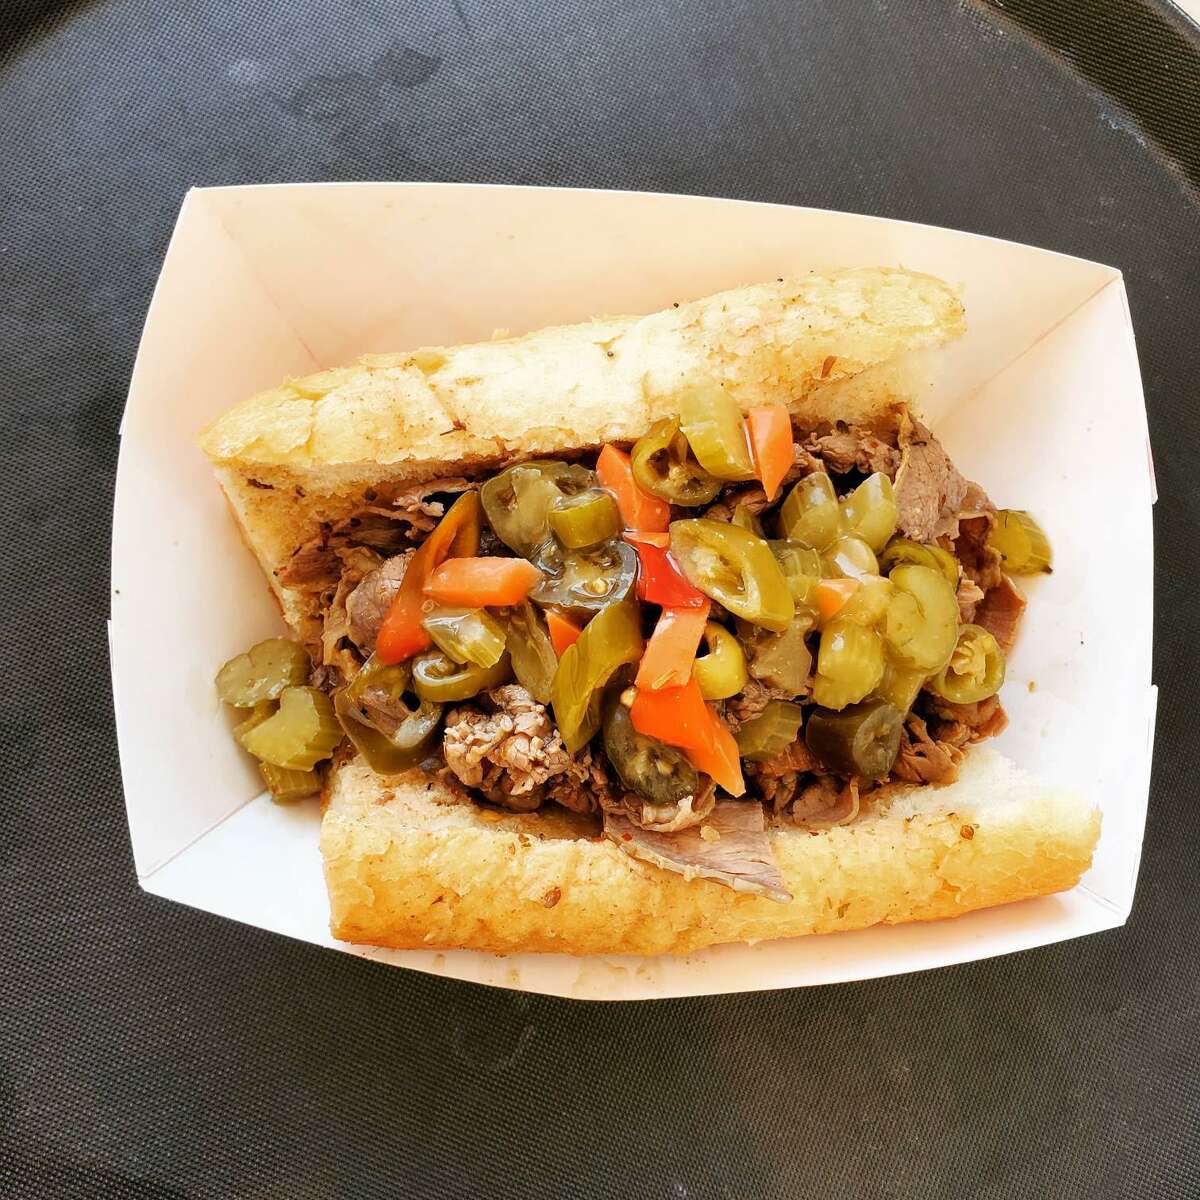 A Chicago-style Italian beef sandwich at Line 51 in Oakland.